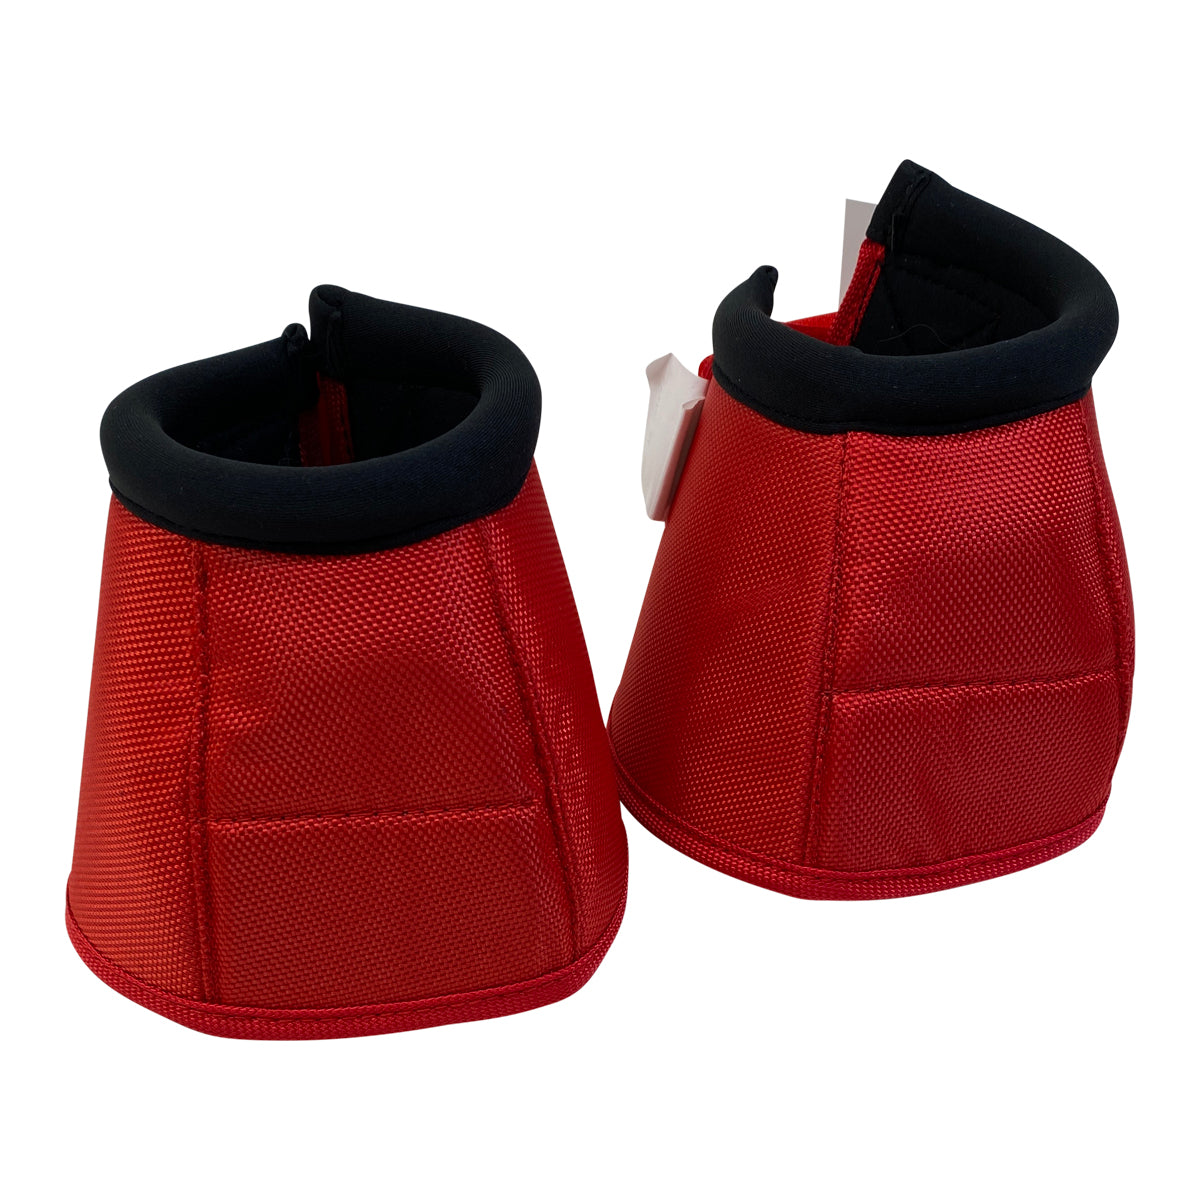 Rugged Ride Ballistic Nylon No-Turn Overreach Bell Boots in Red